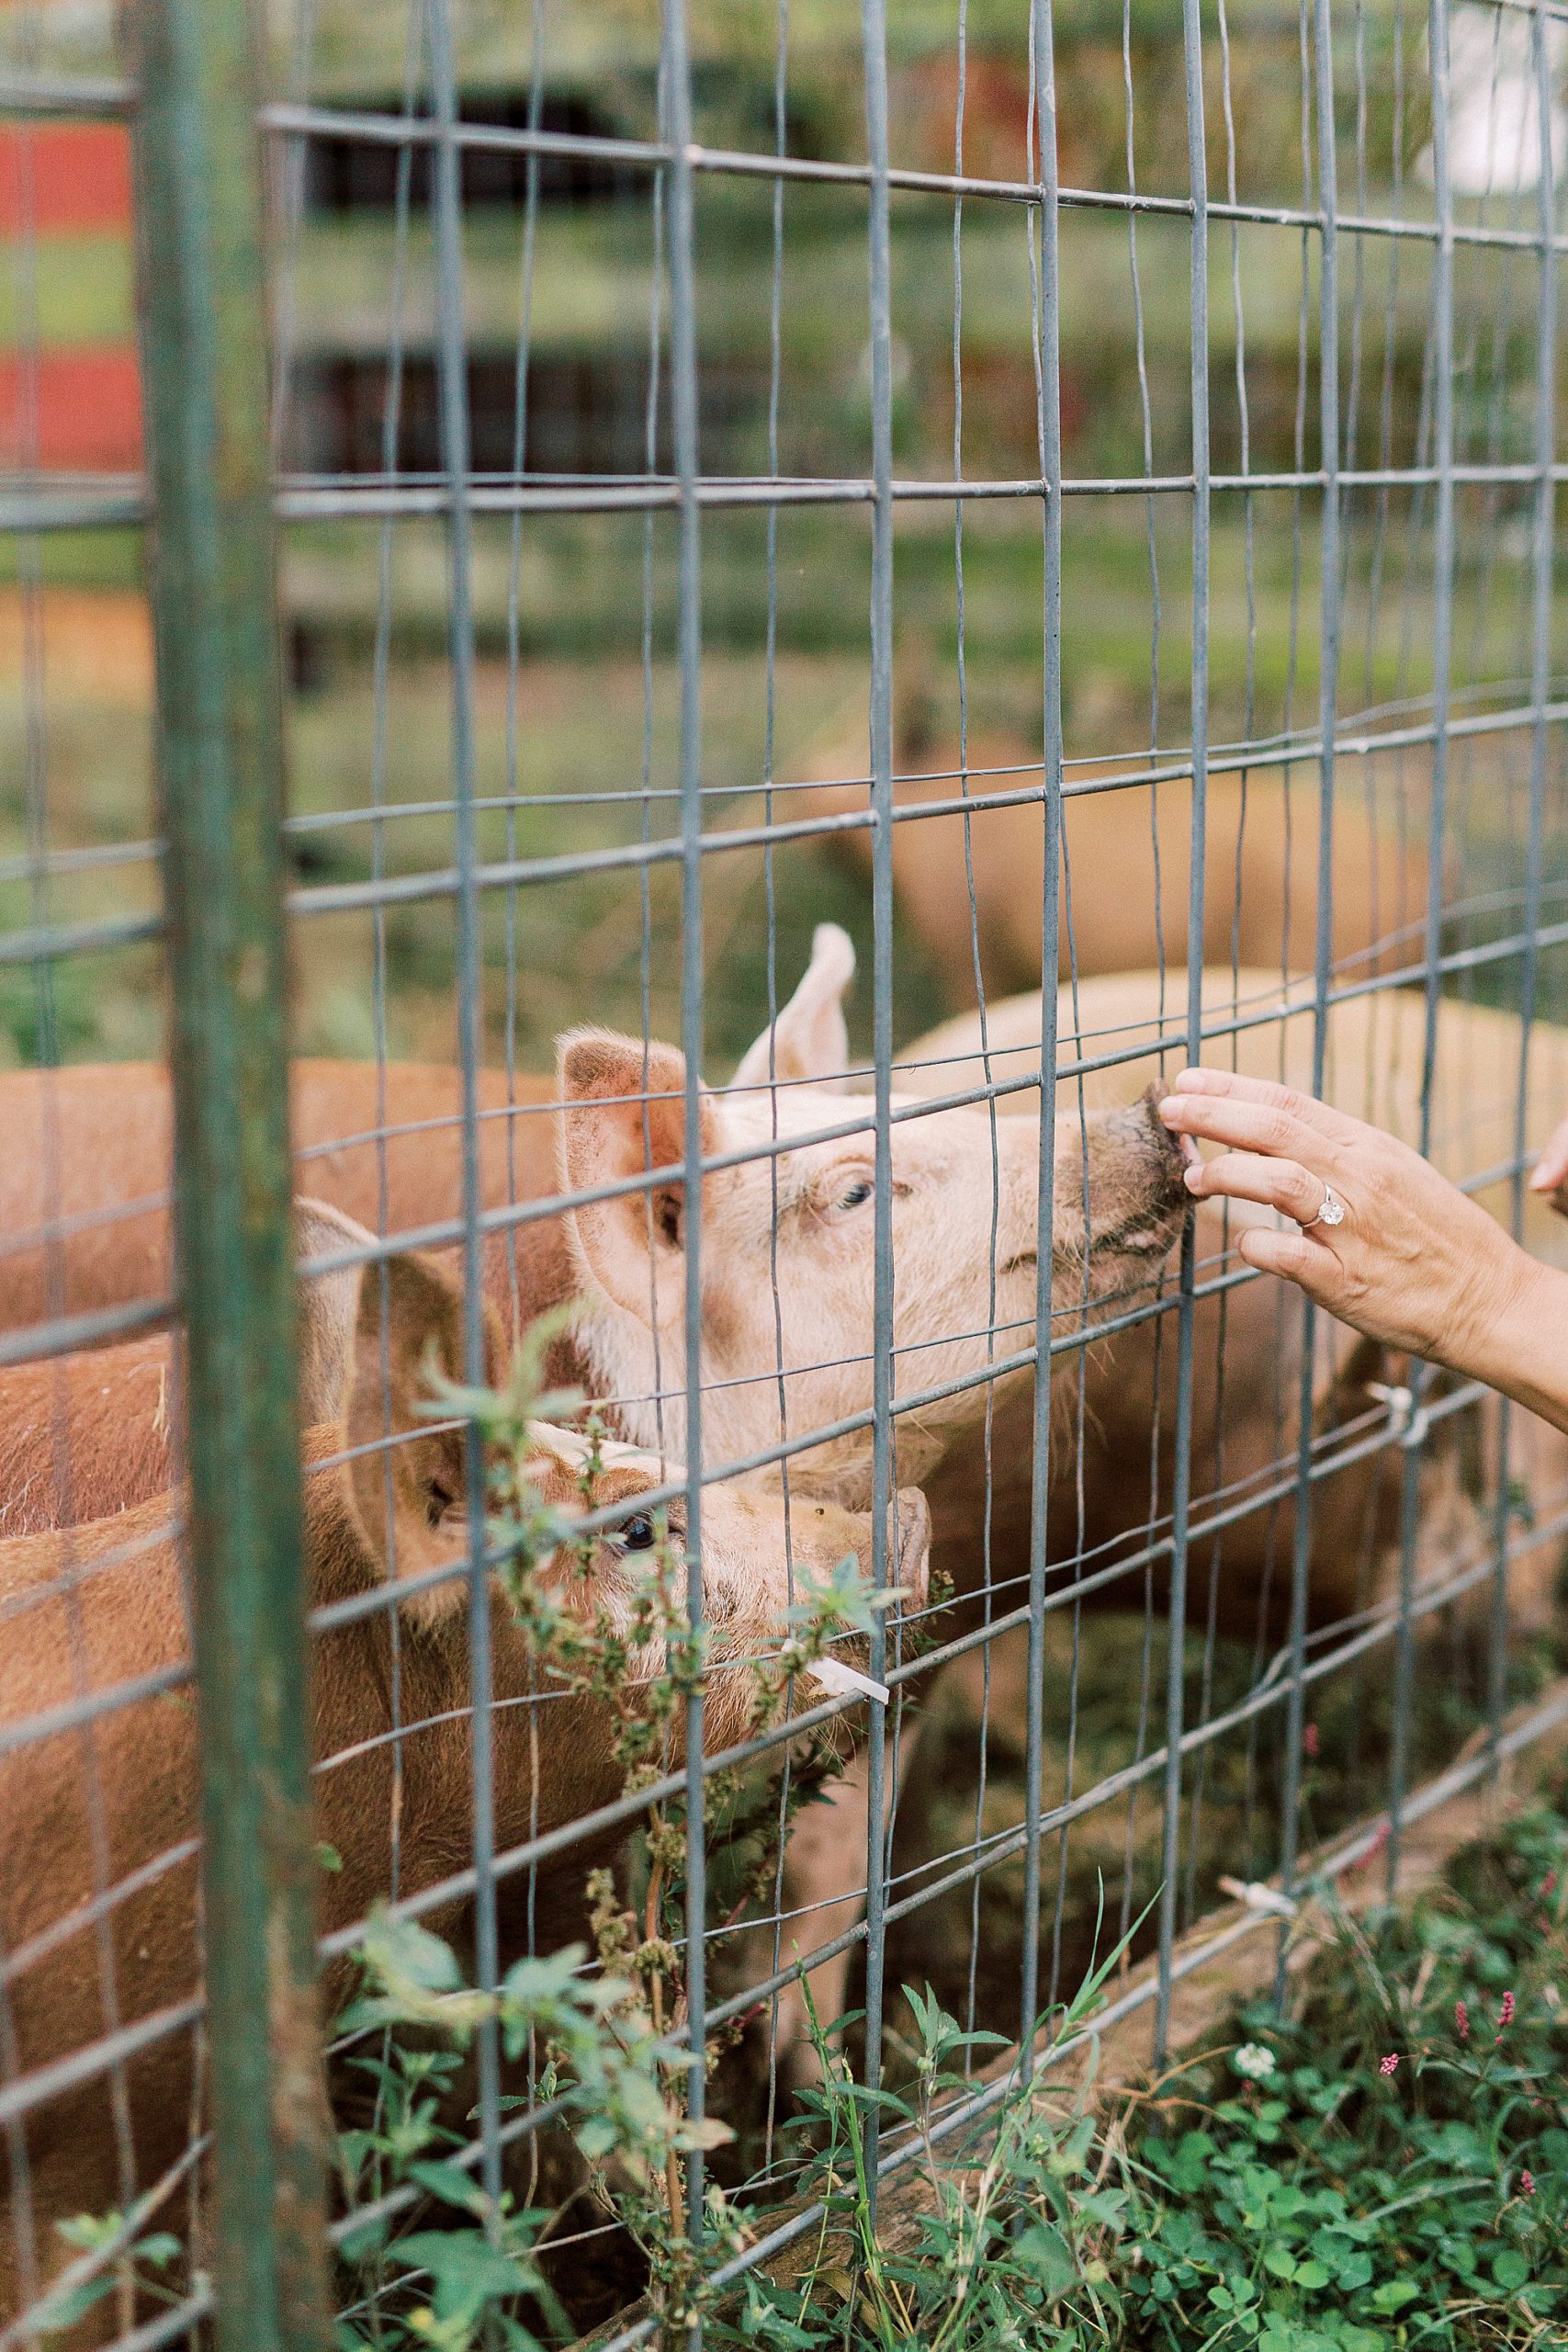 engaged woman pets pig's nose